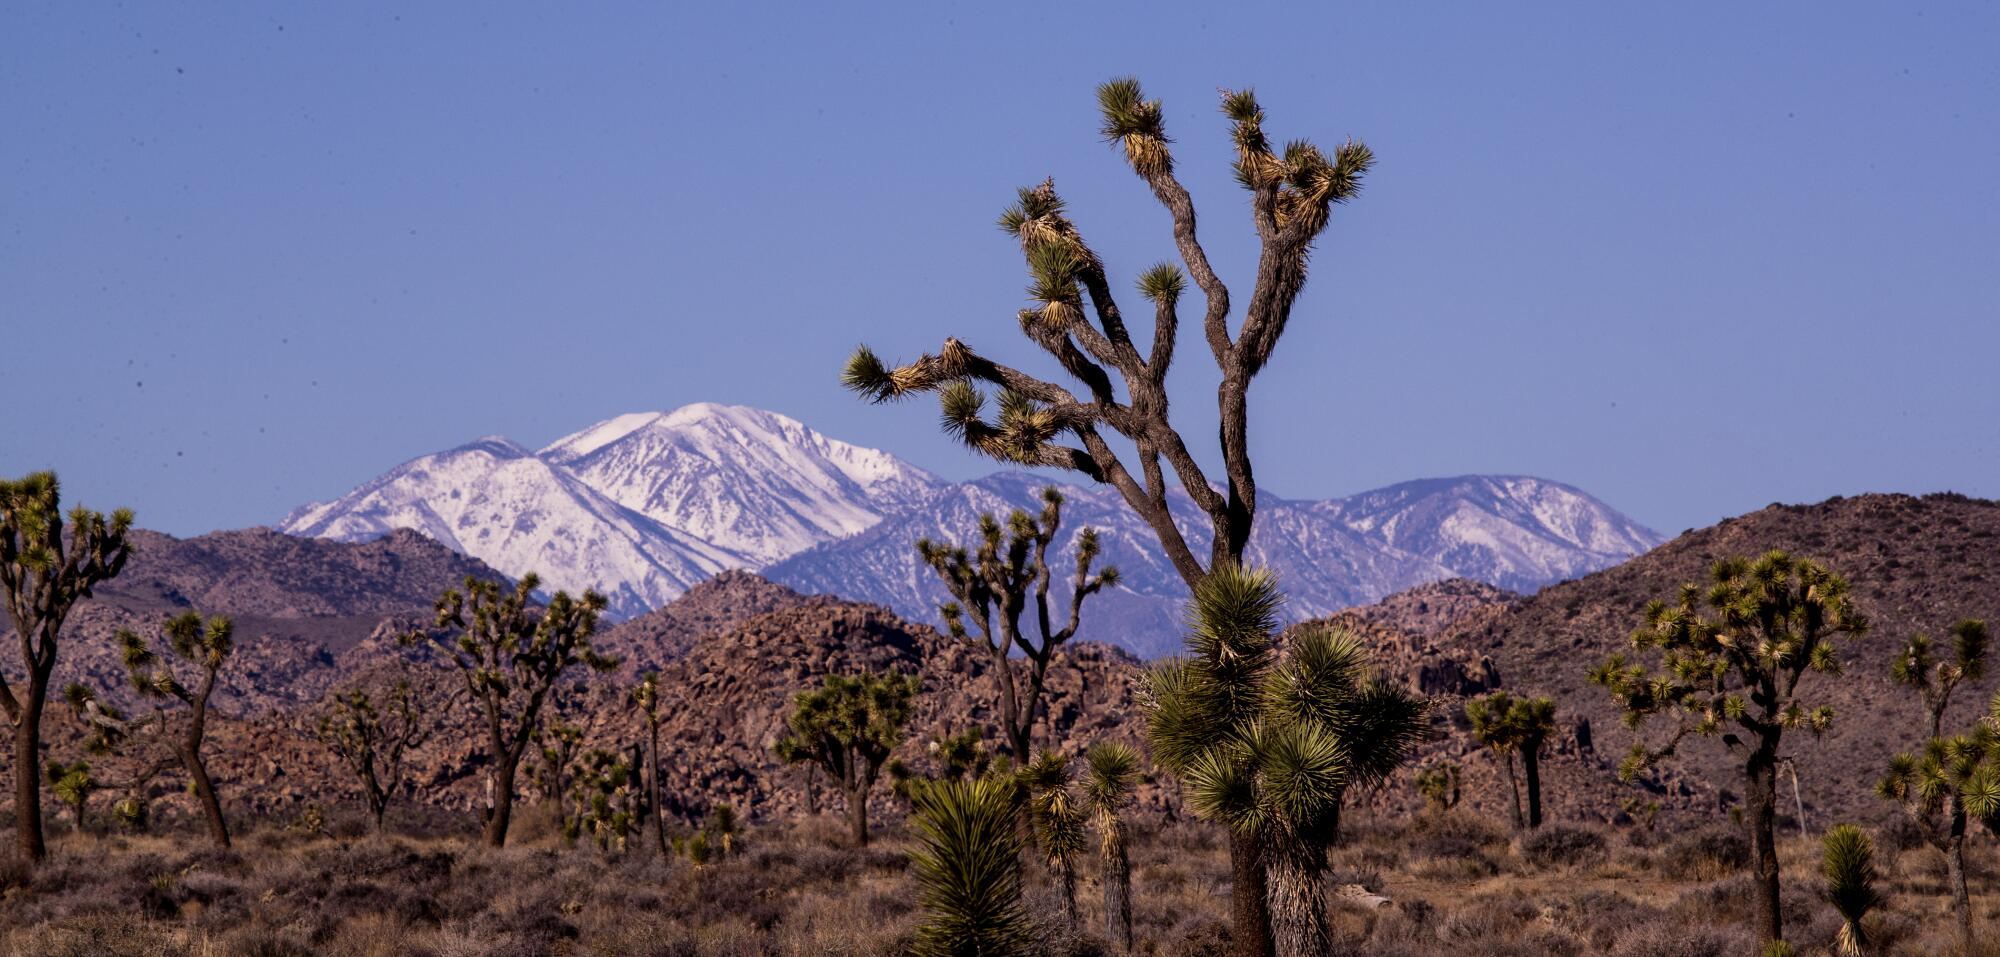 Joshua trees rise from the desert as a snow-capped mountain looms in the distance.